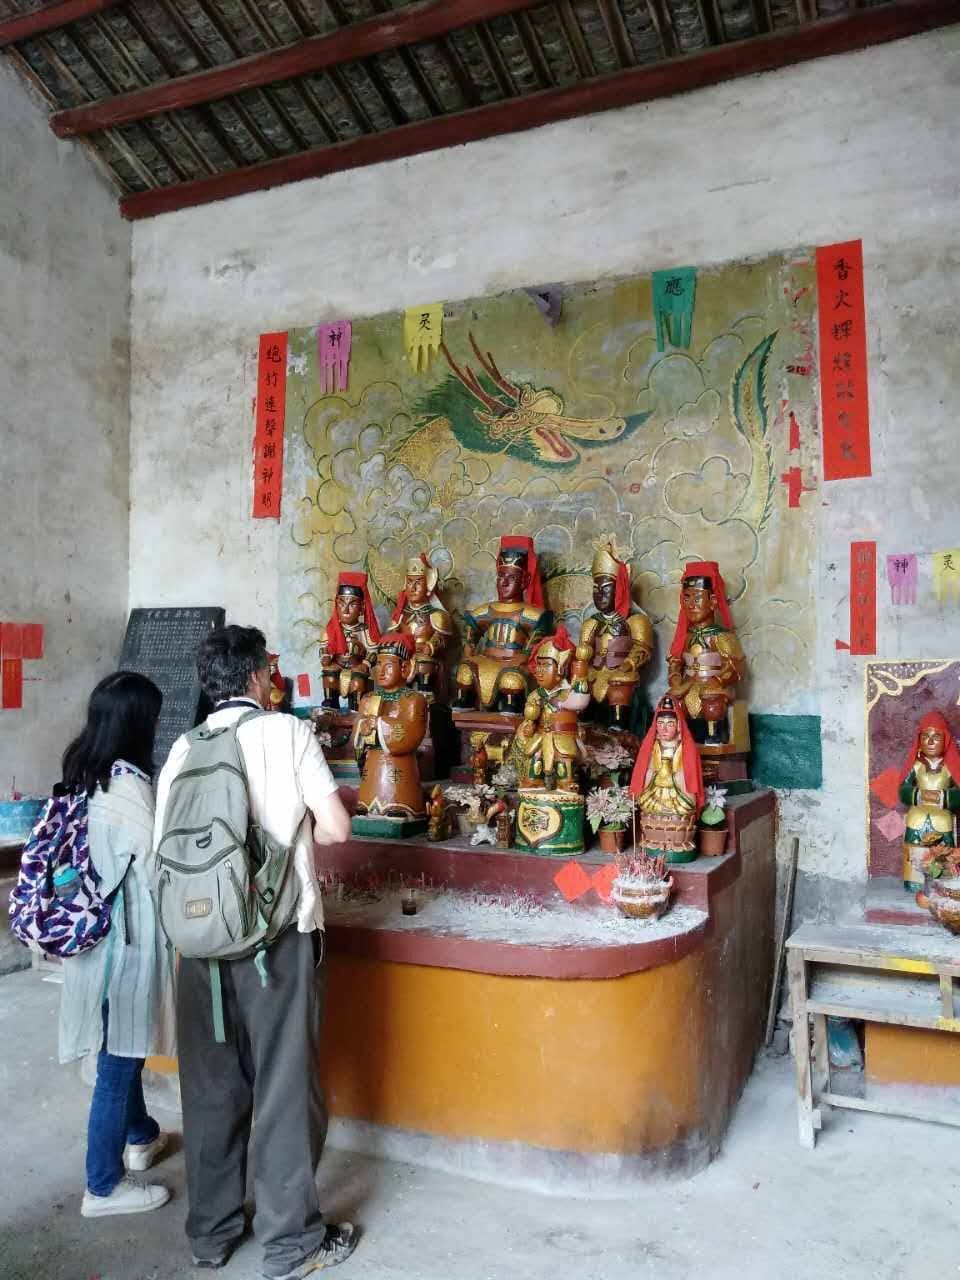 They worship some local deities in the village. Is it Daoism? I could not figure out what religion they believe in this village. Please let me know if anyone knows what kind of religion is this. 😉